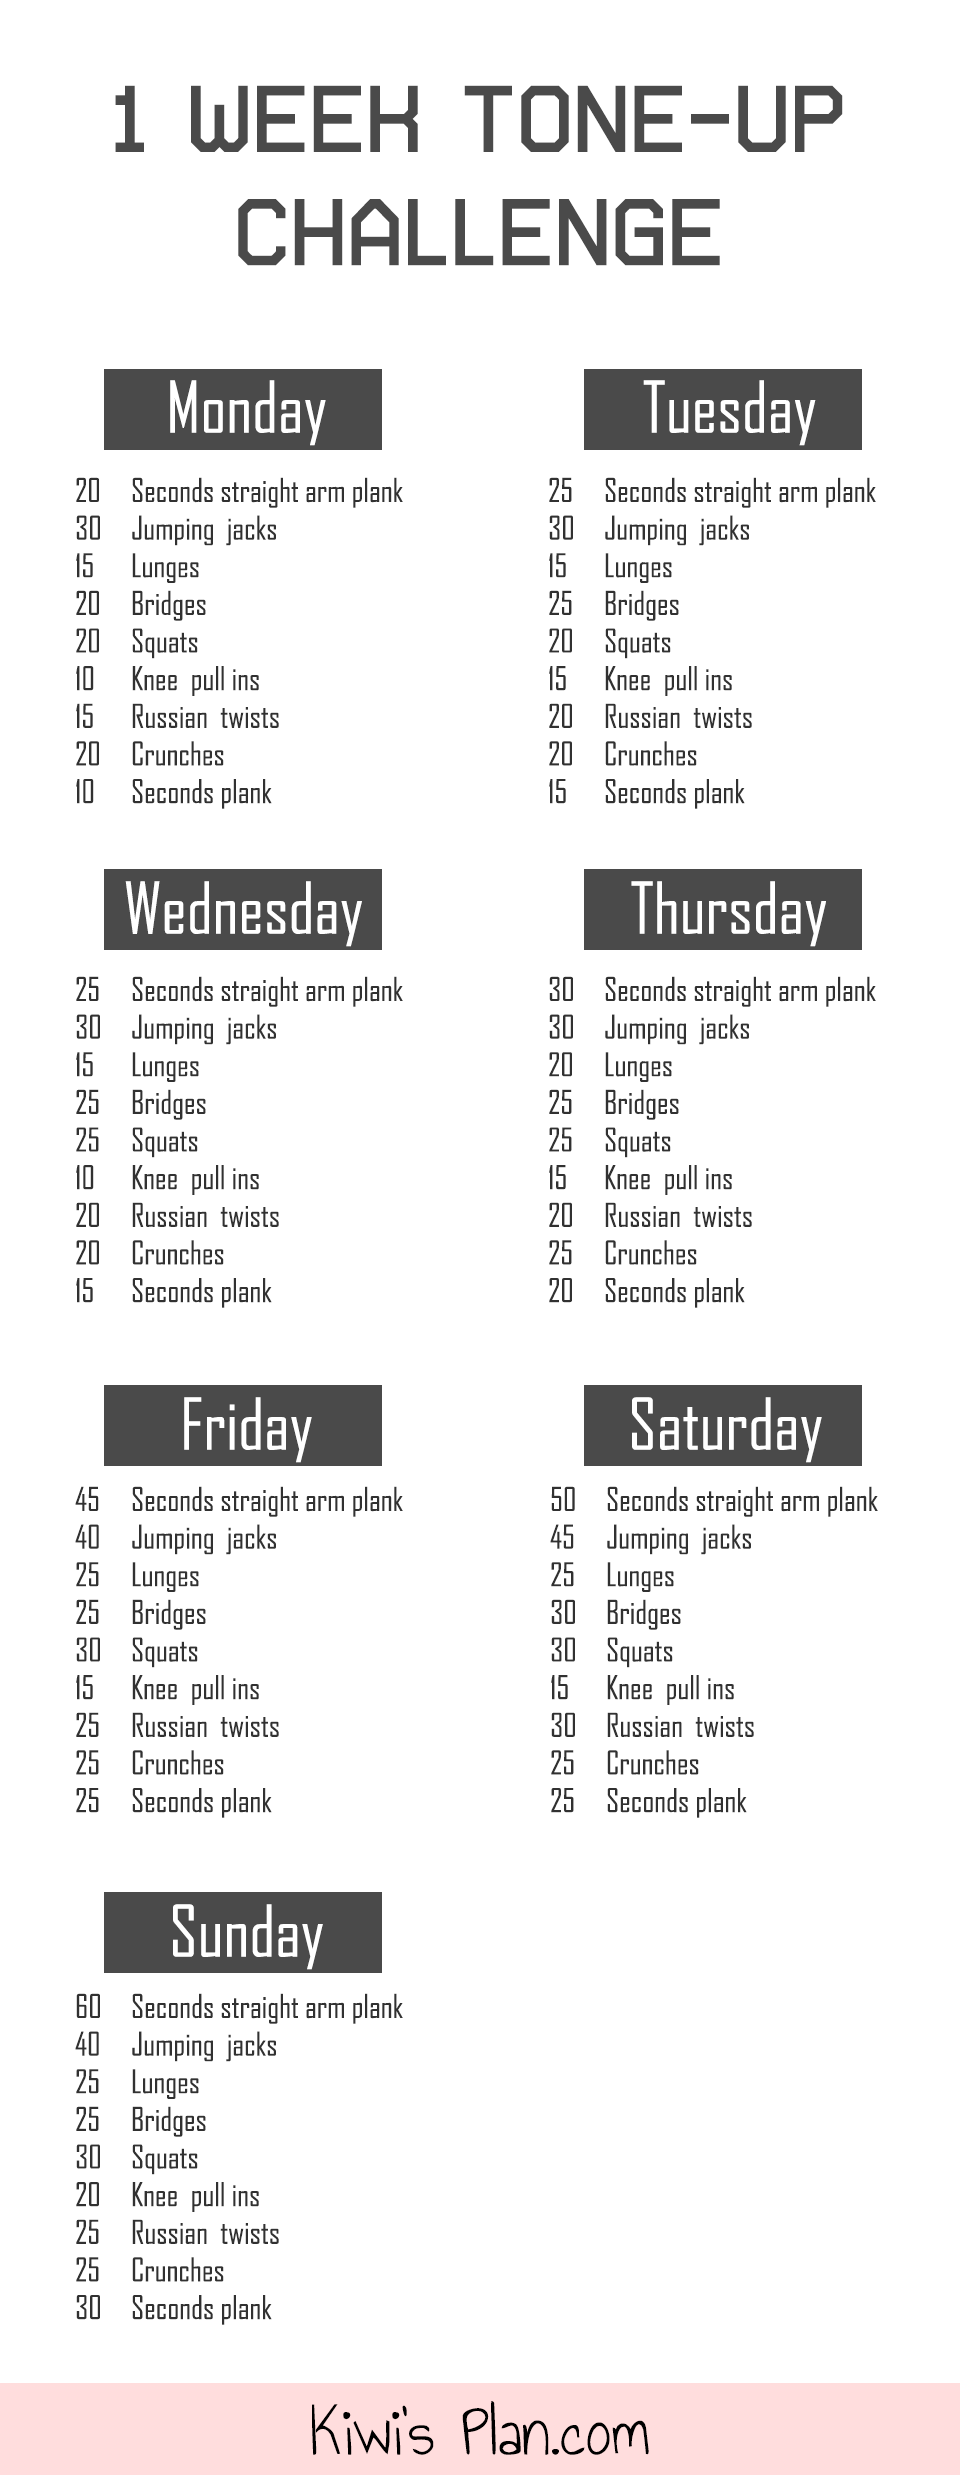 19 weekly fitness Goals ideas